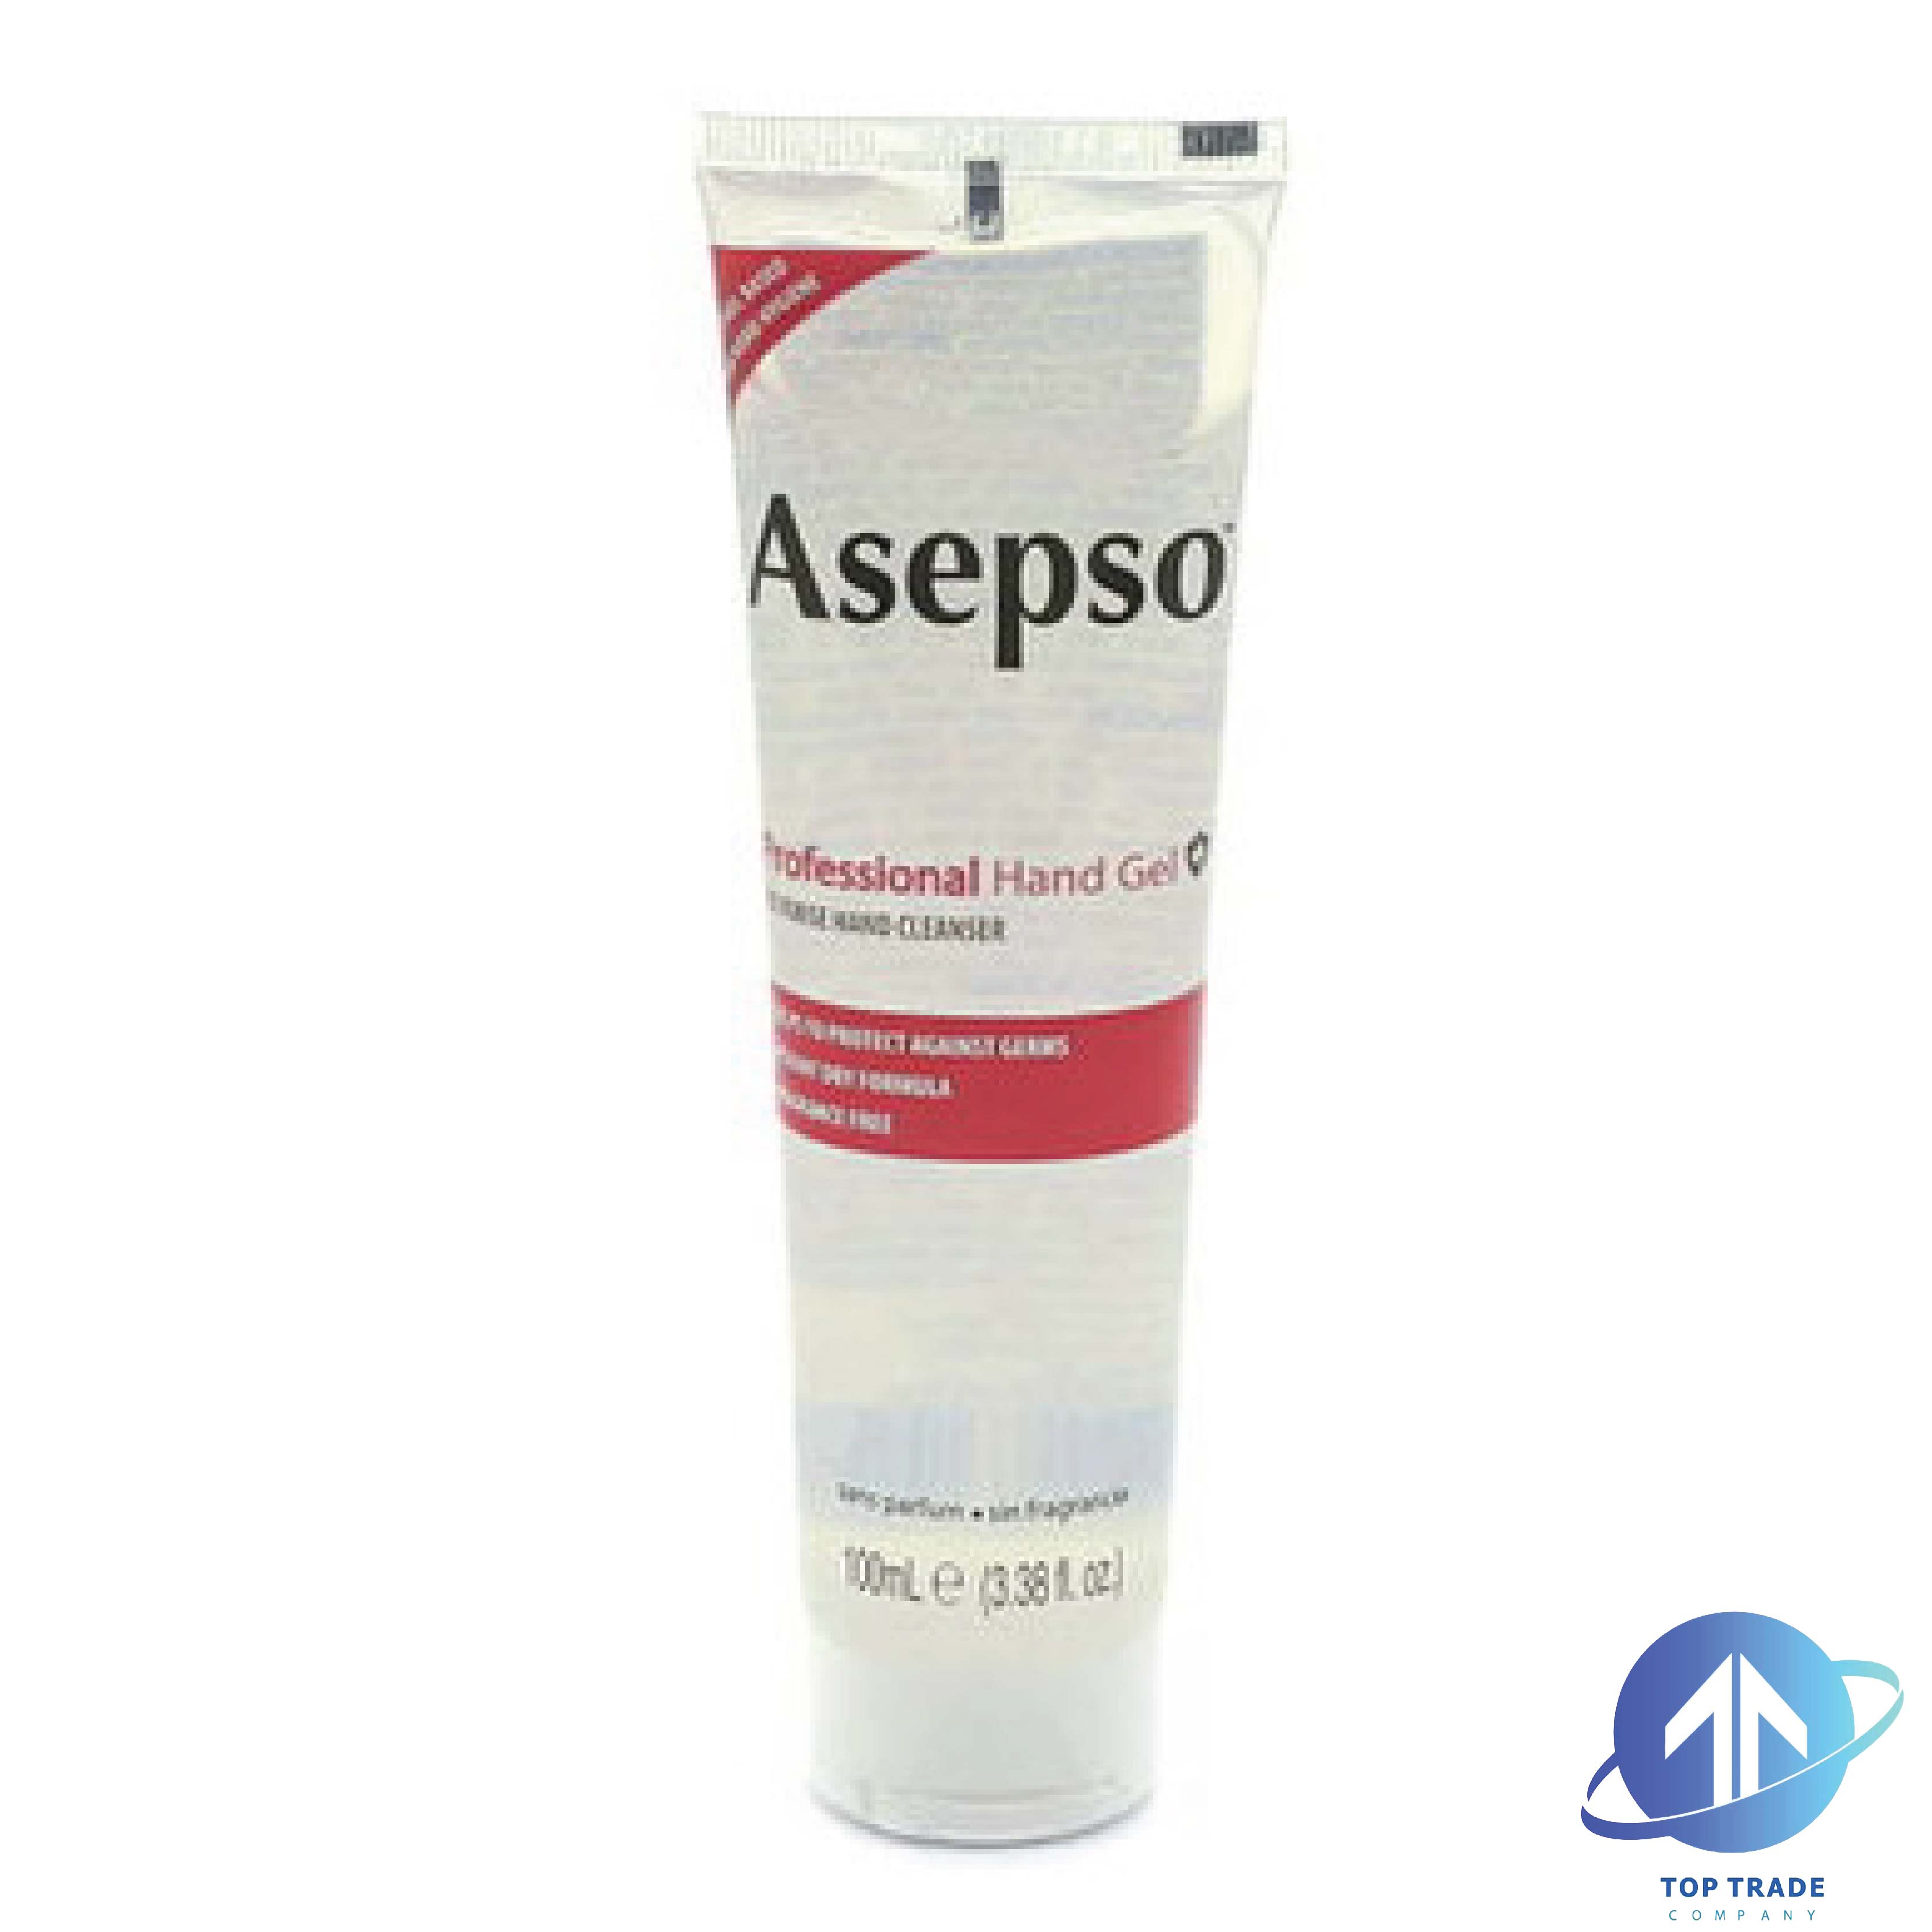 Asepso hydroalcoholic gel 100ml professional (2)